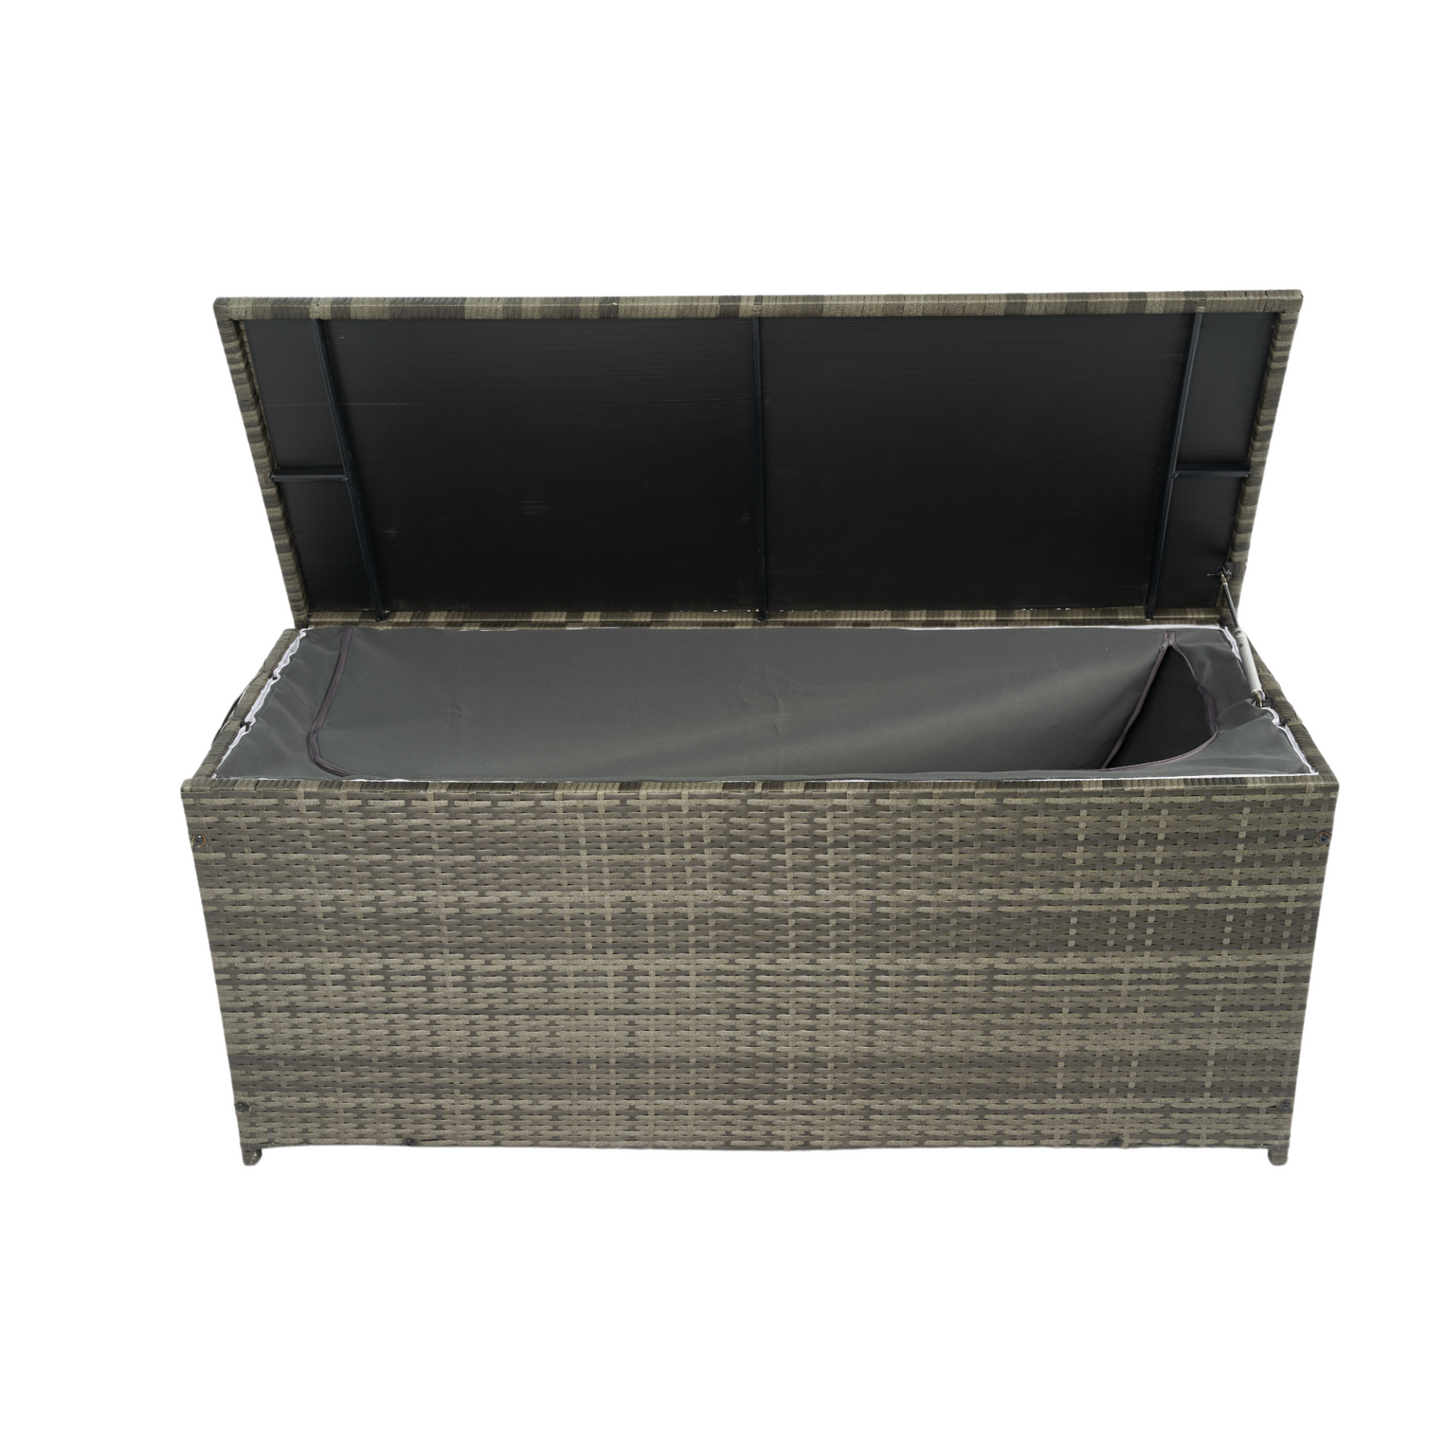 Outdoor Storage Box, 113 Gallon Wicker Patio Deck Boxes with Lid, Outdoor Cushion Storage for Kids Toys, Pillows, Towel Grey Wicker Môdern Space Gallery